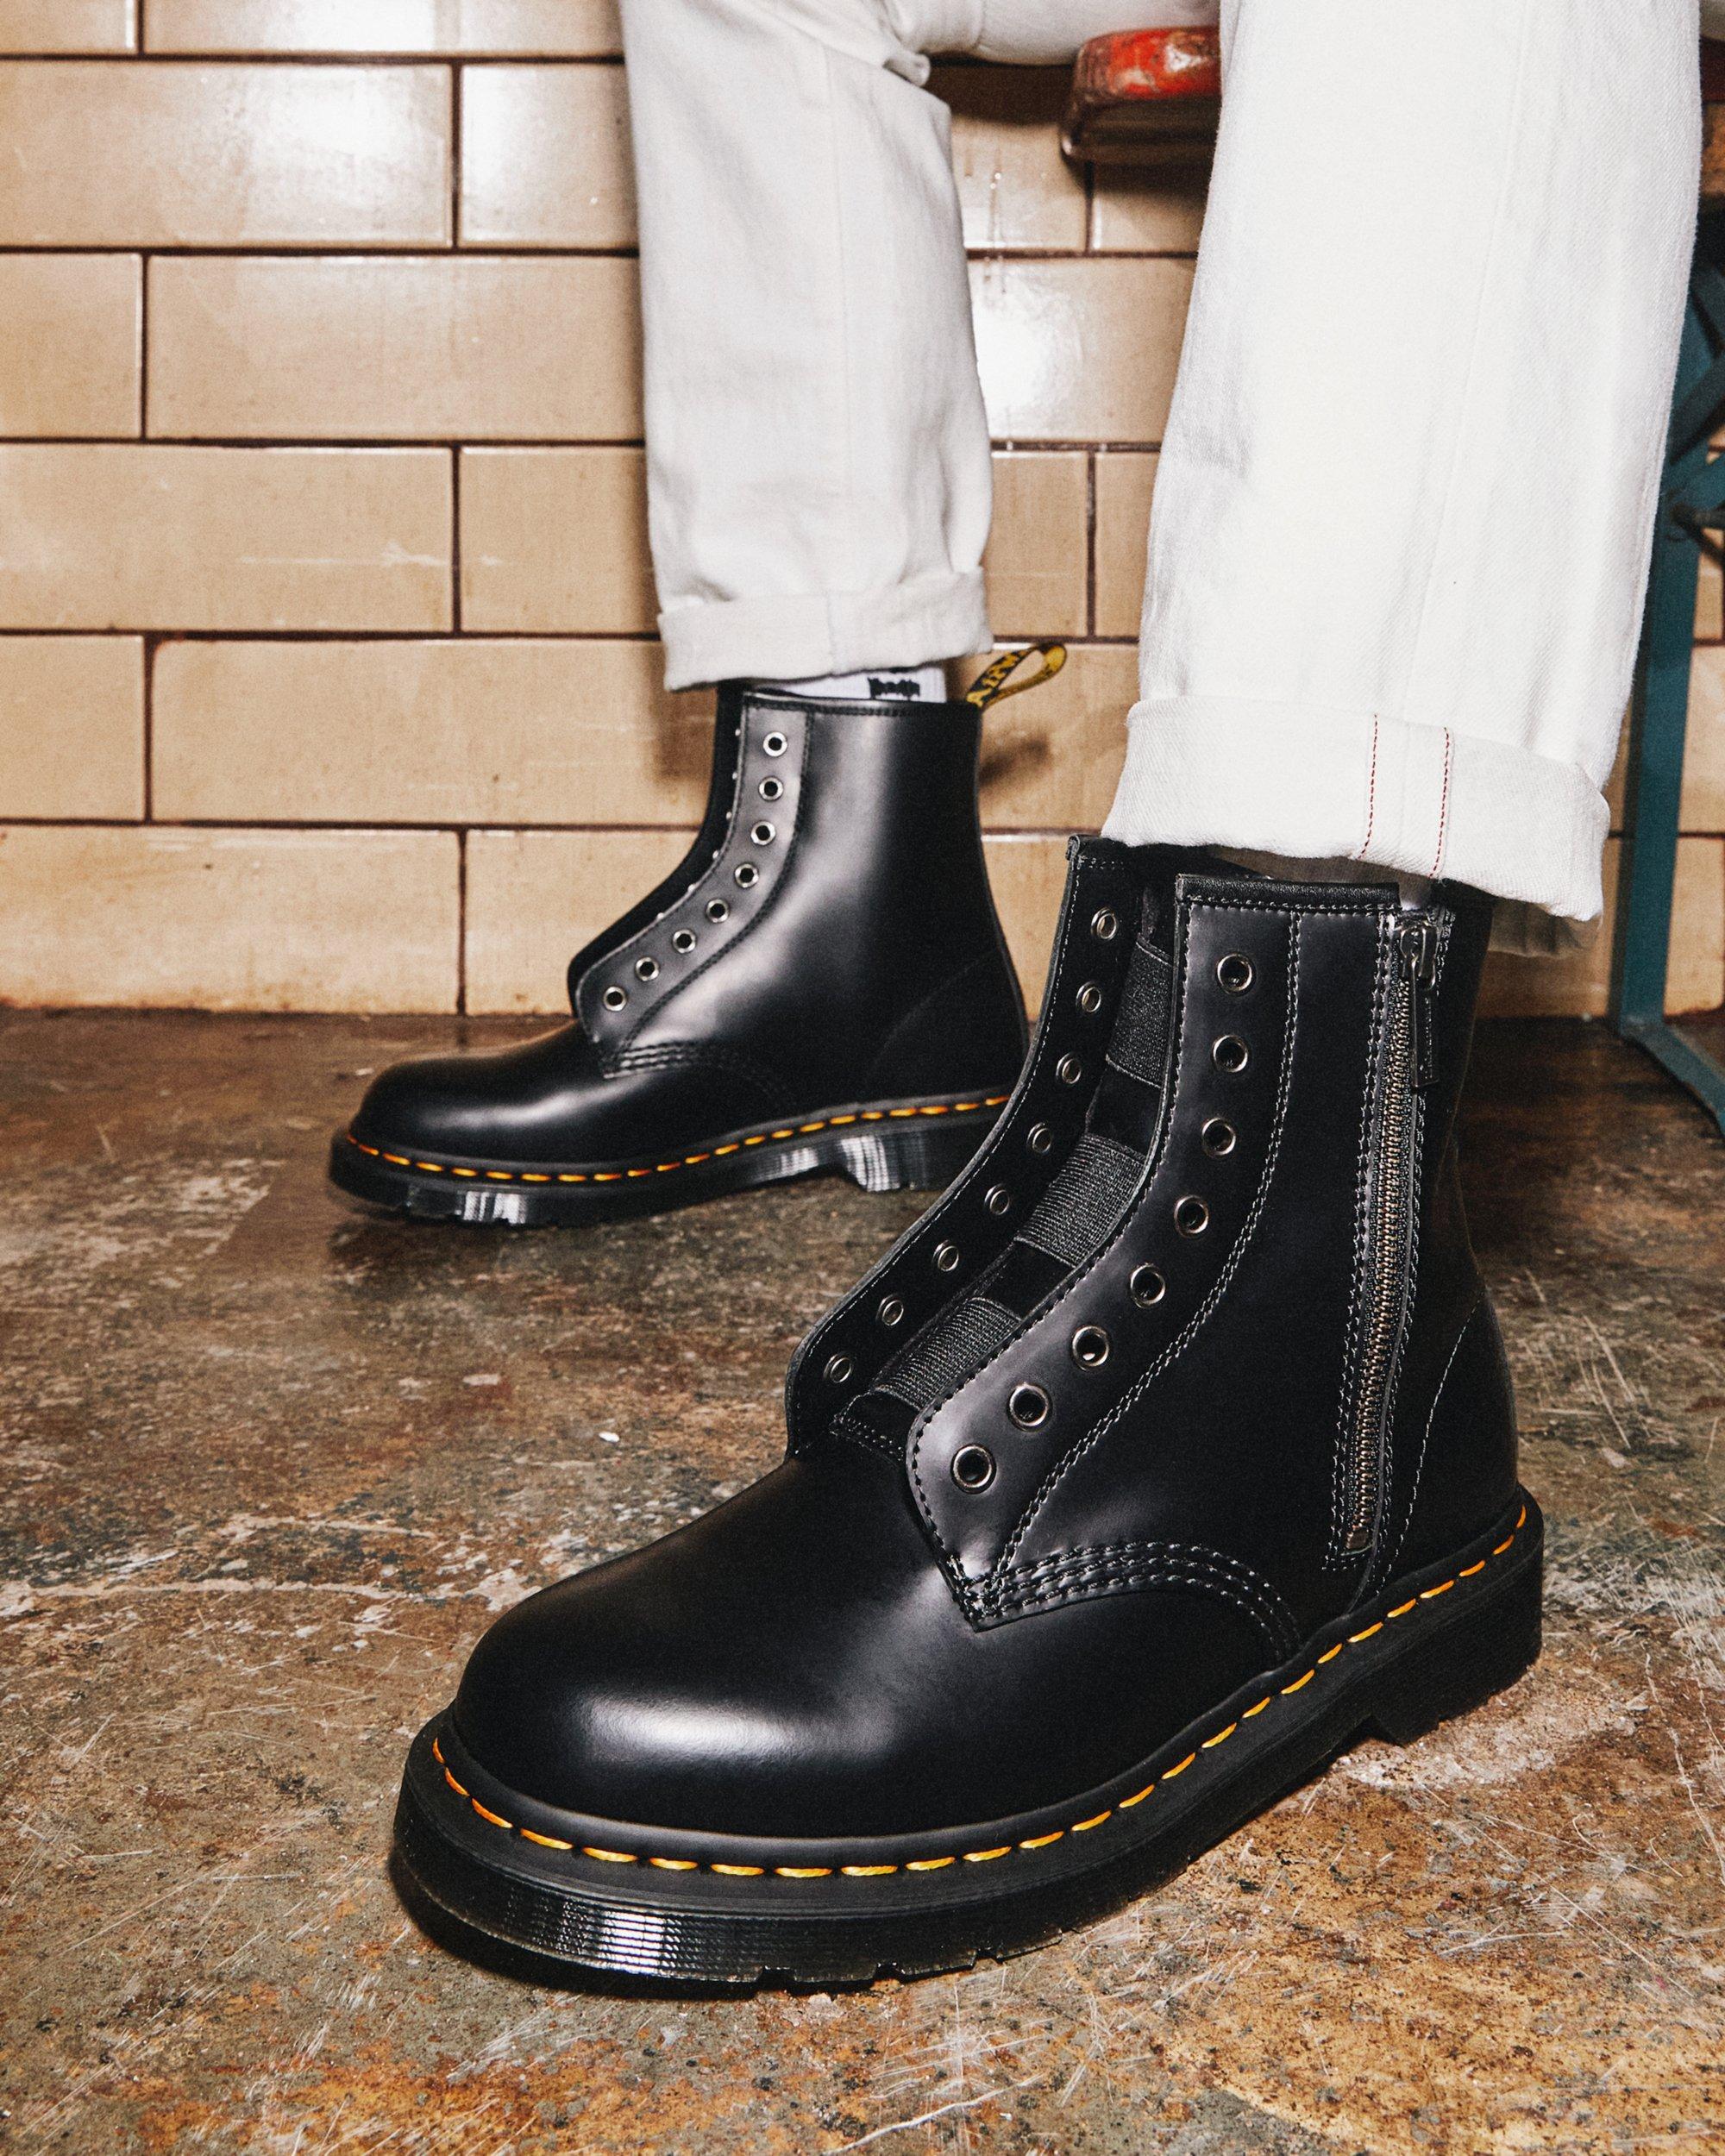 Buy > leather boots lace up > in stock